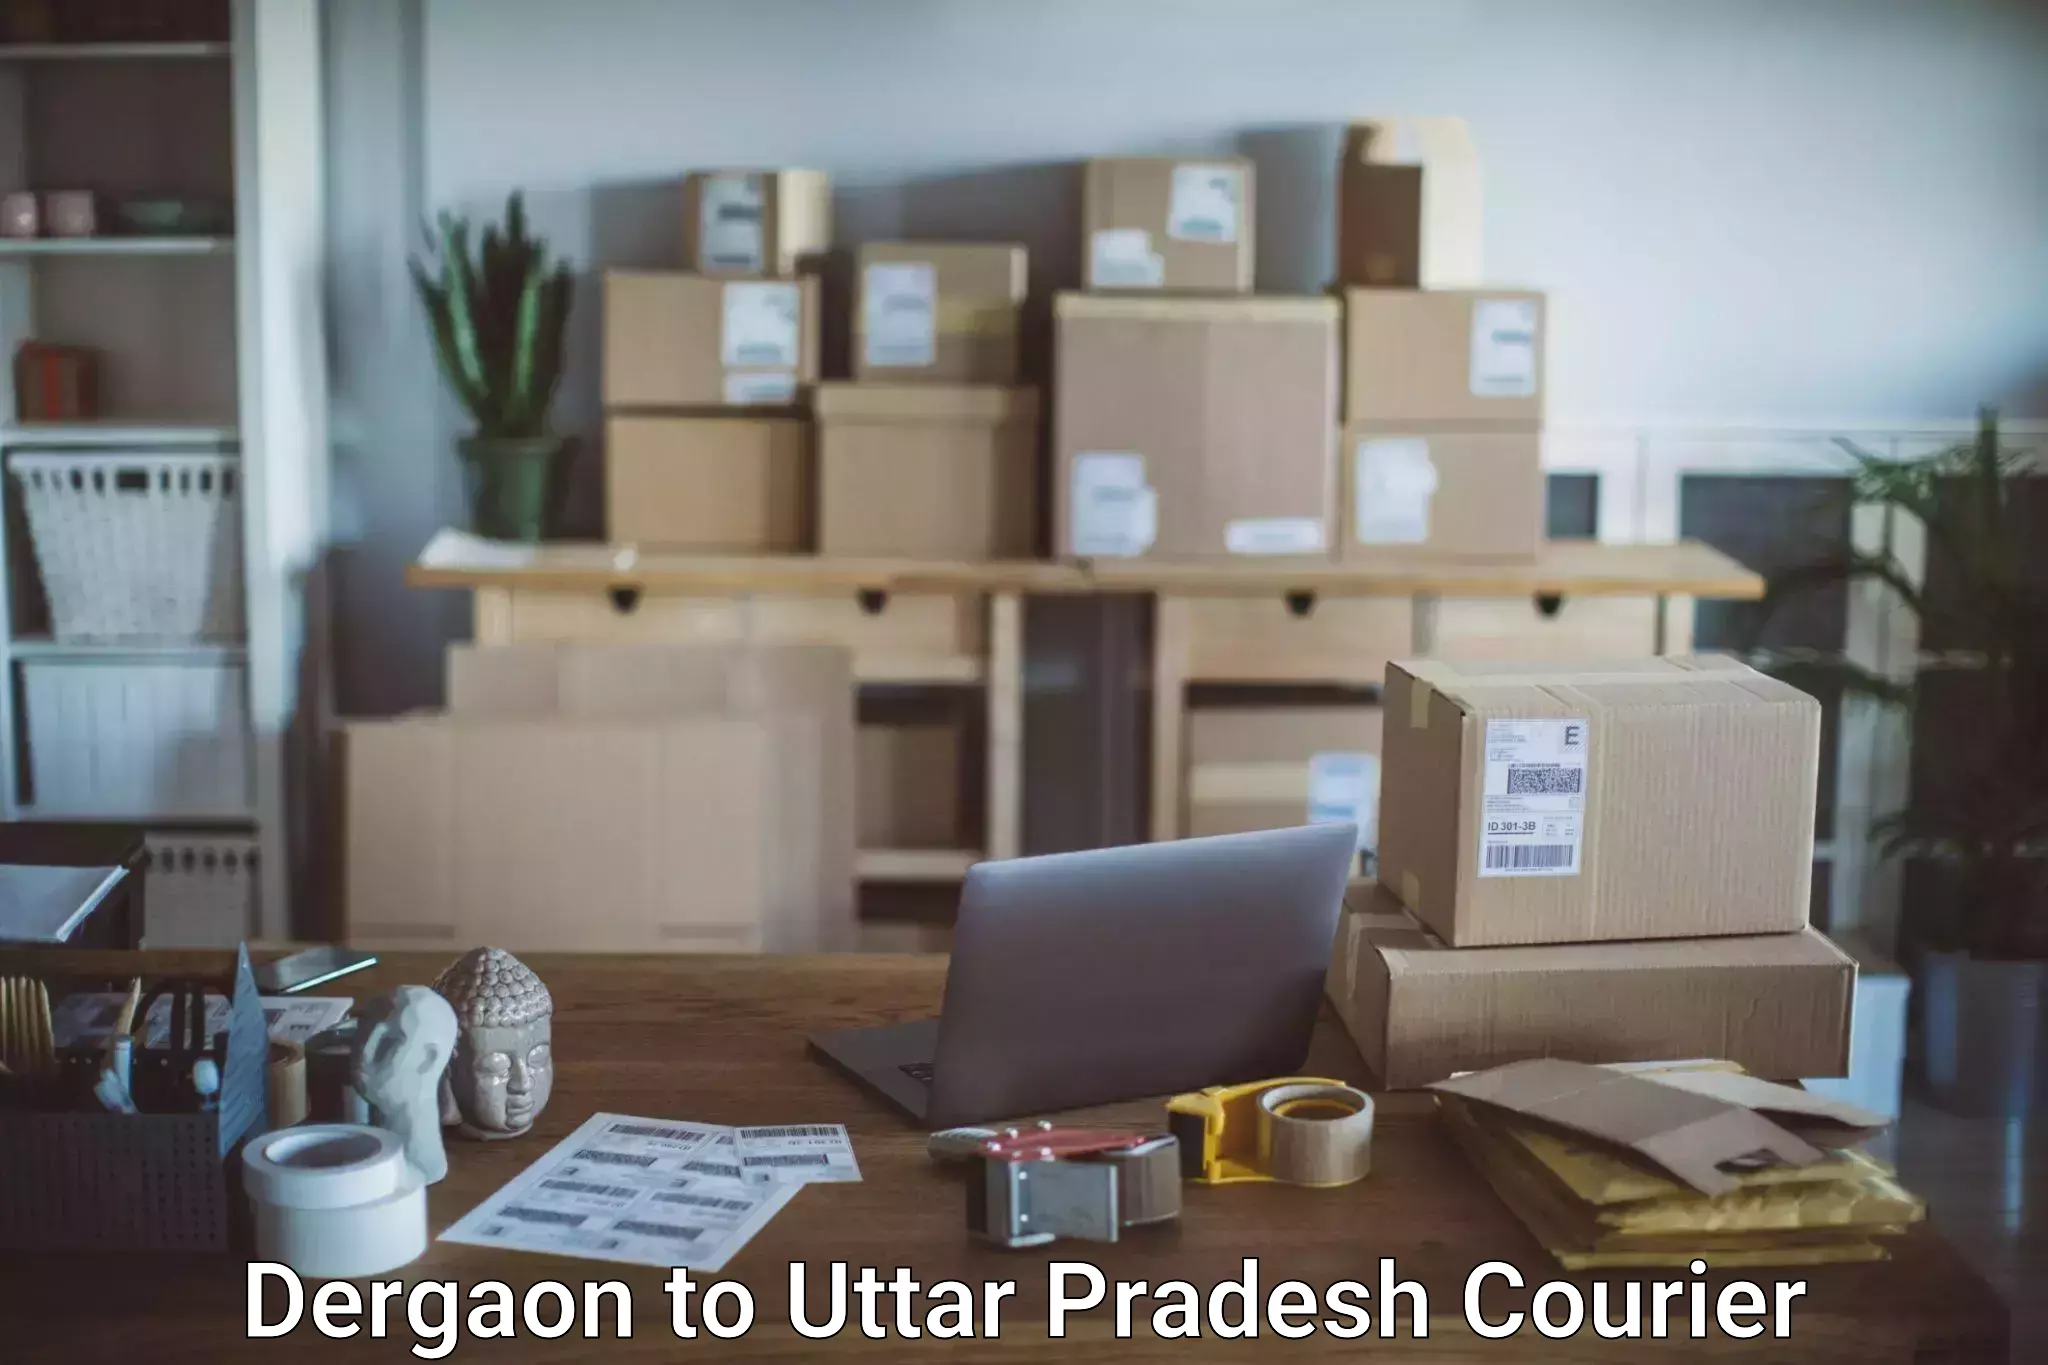 Hassle-free luggage shipping Dergaon to Allahabad